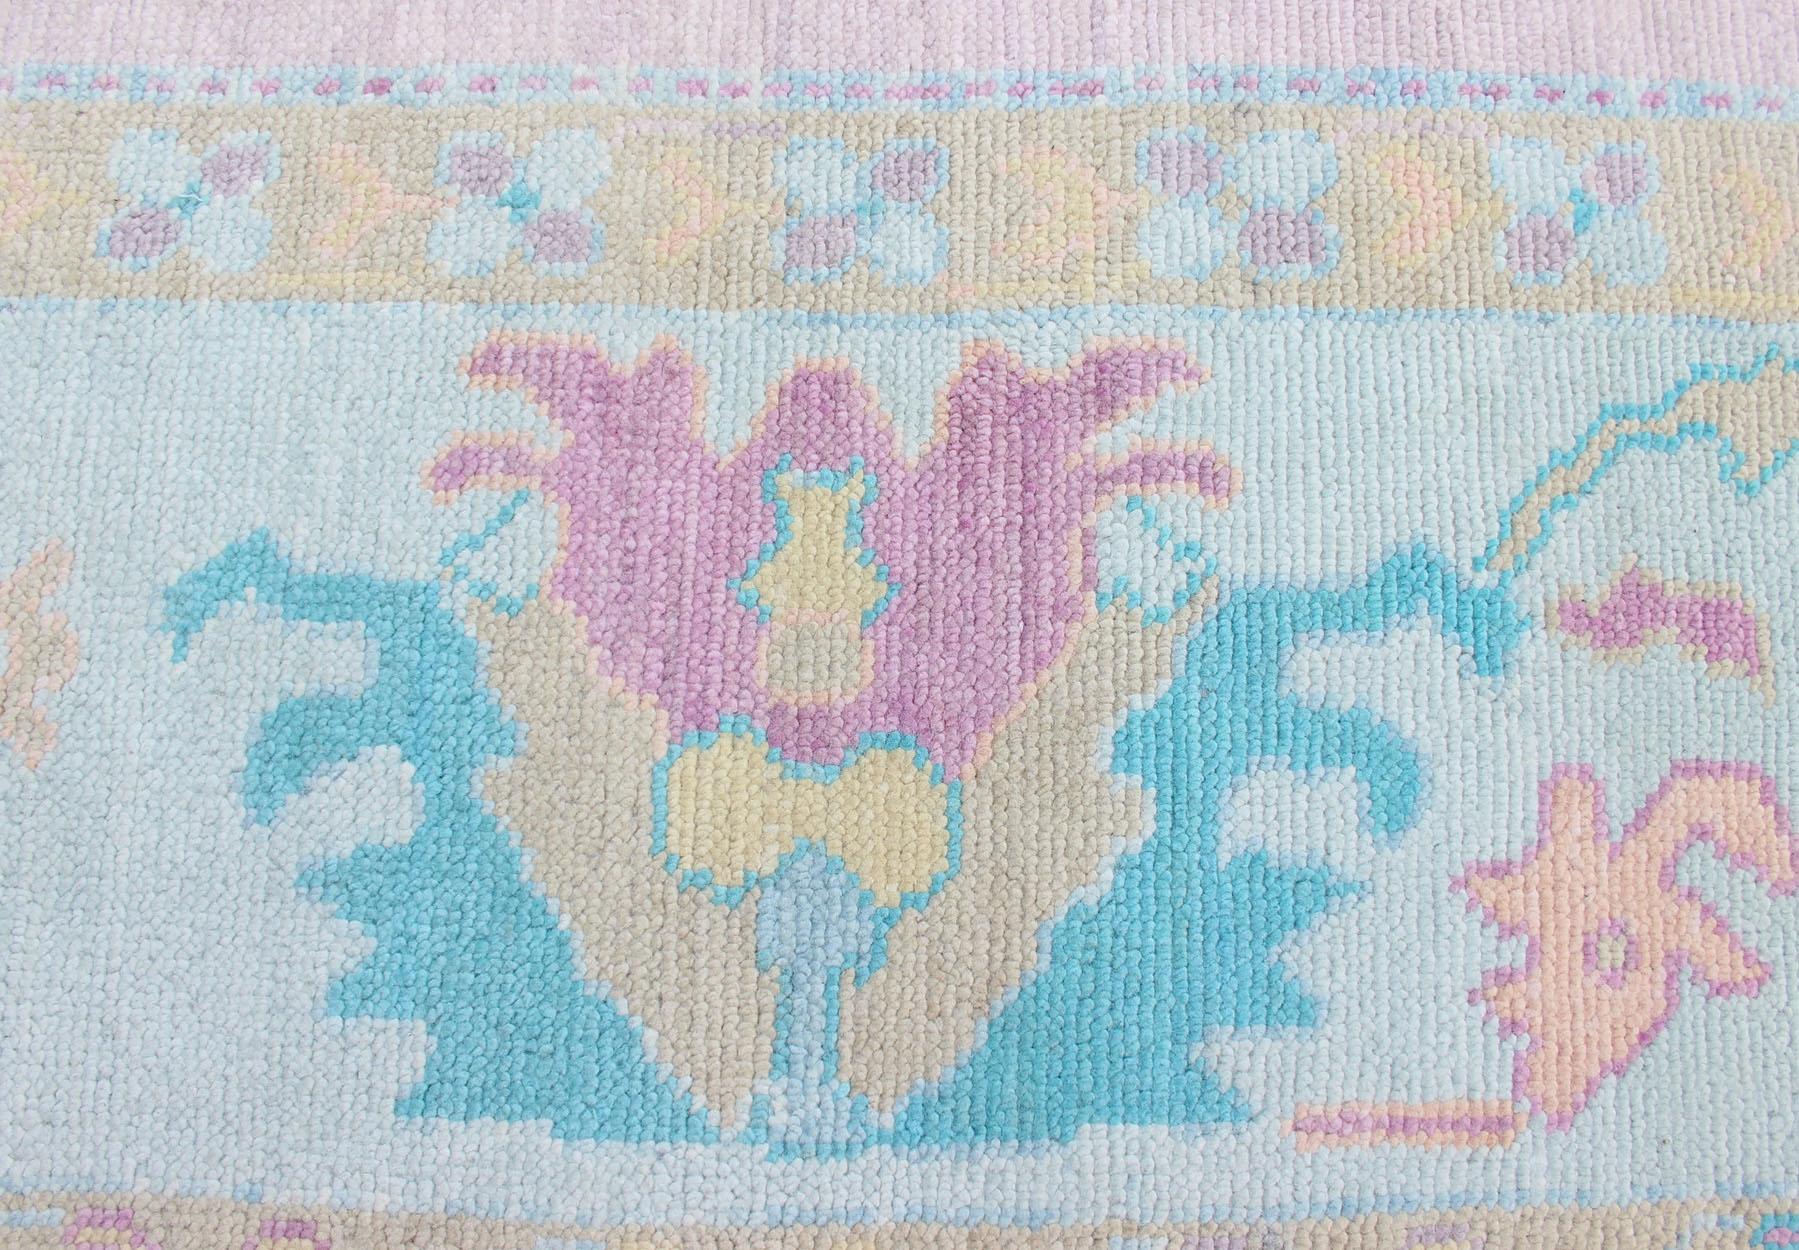 Hand-Knotted Keivan Woven Arts Modern Wool Oushak Rug In Pink Ice Blue Border  9'5 x 12'1 For Sale